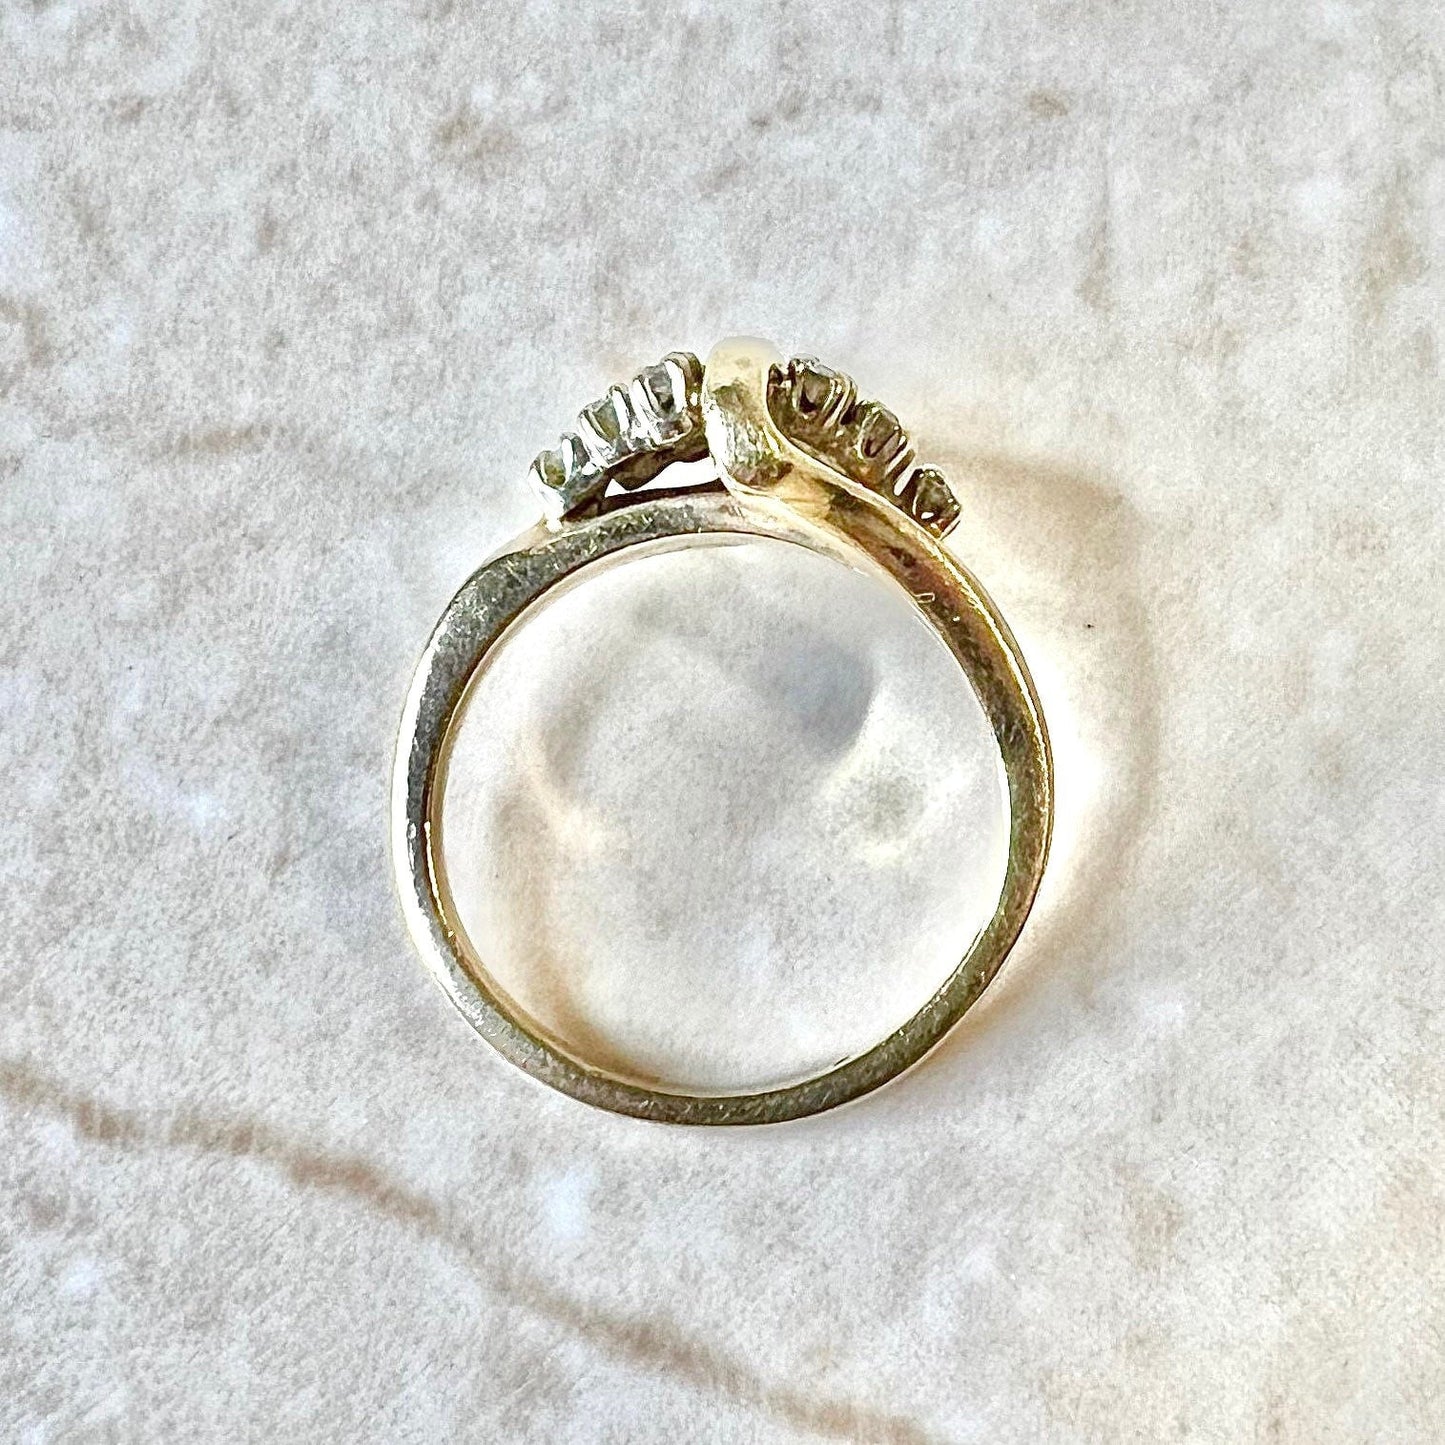 Vintage 14K Diamond Cluster Ring - Yellow Gold Diamond Cocktail Ring - Bypass Ring - Promise Ring - Birthday Gift - Best Gifts For Her